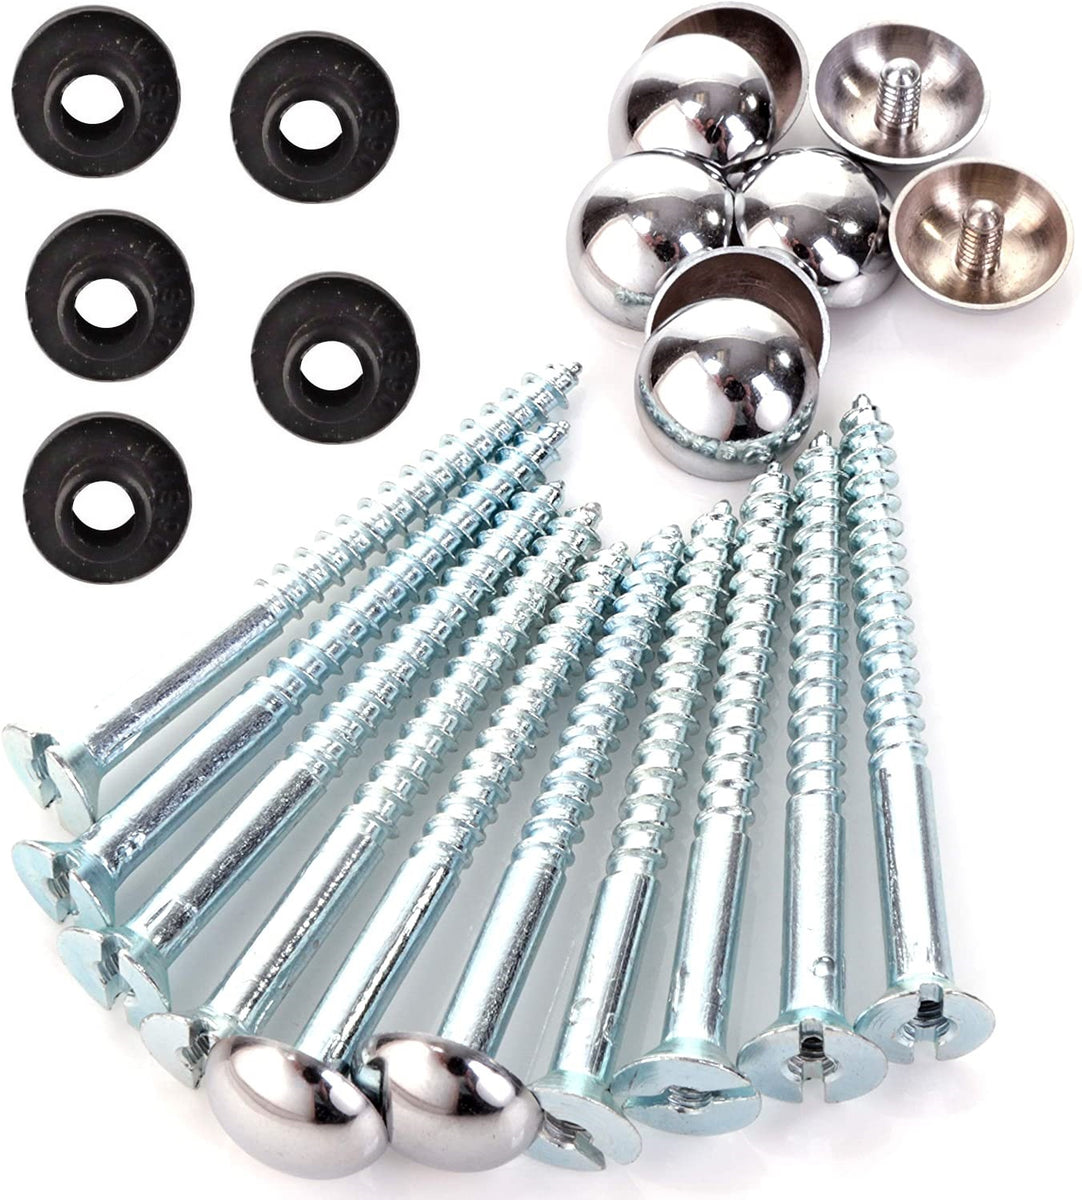 CHROME MIRROR DISCS & 2" SCREWS WITH RUBBER WASHER FIXINGS BATHROOM DISC *